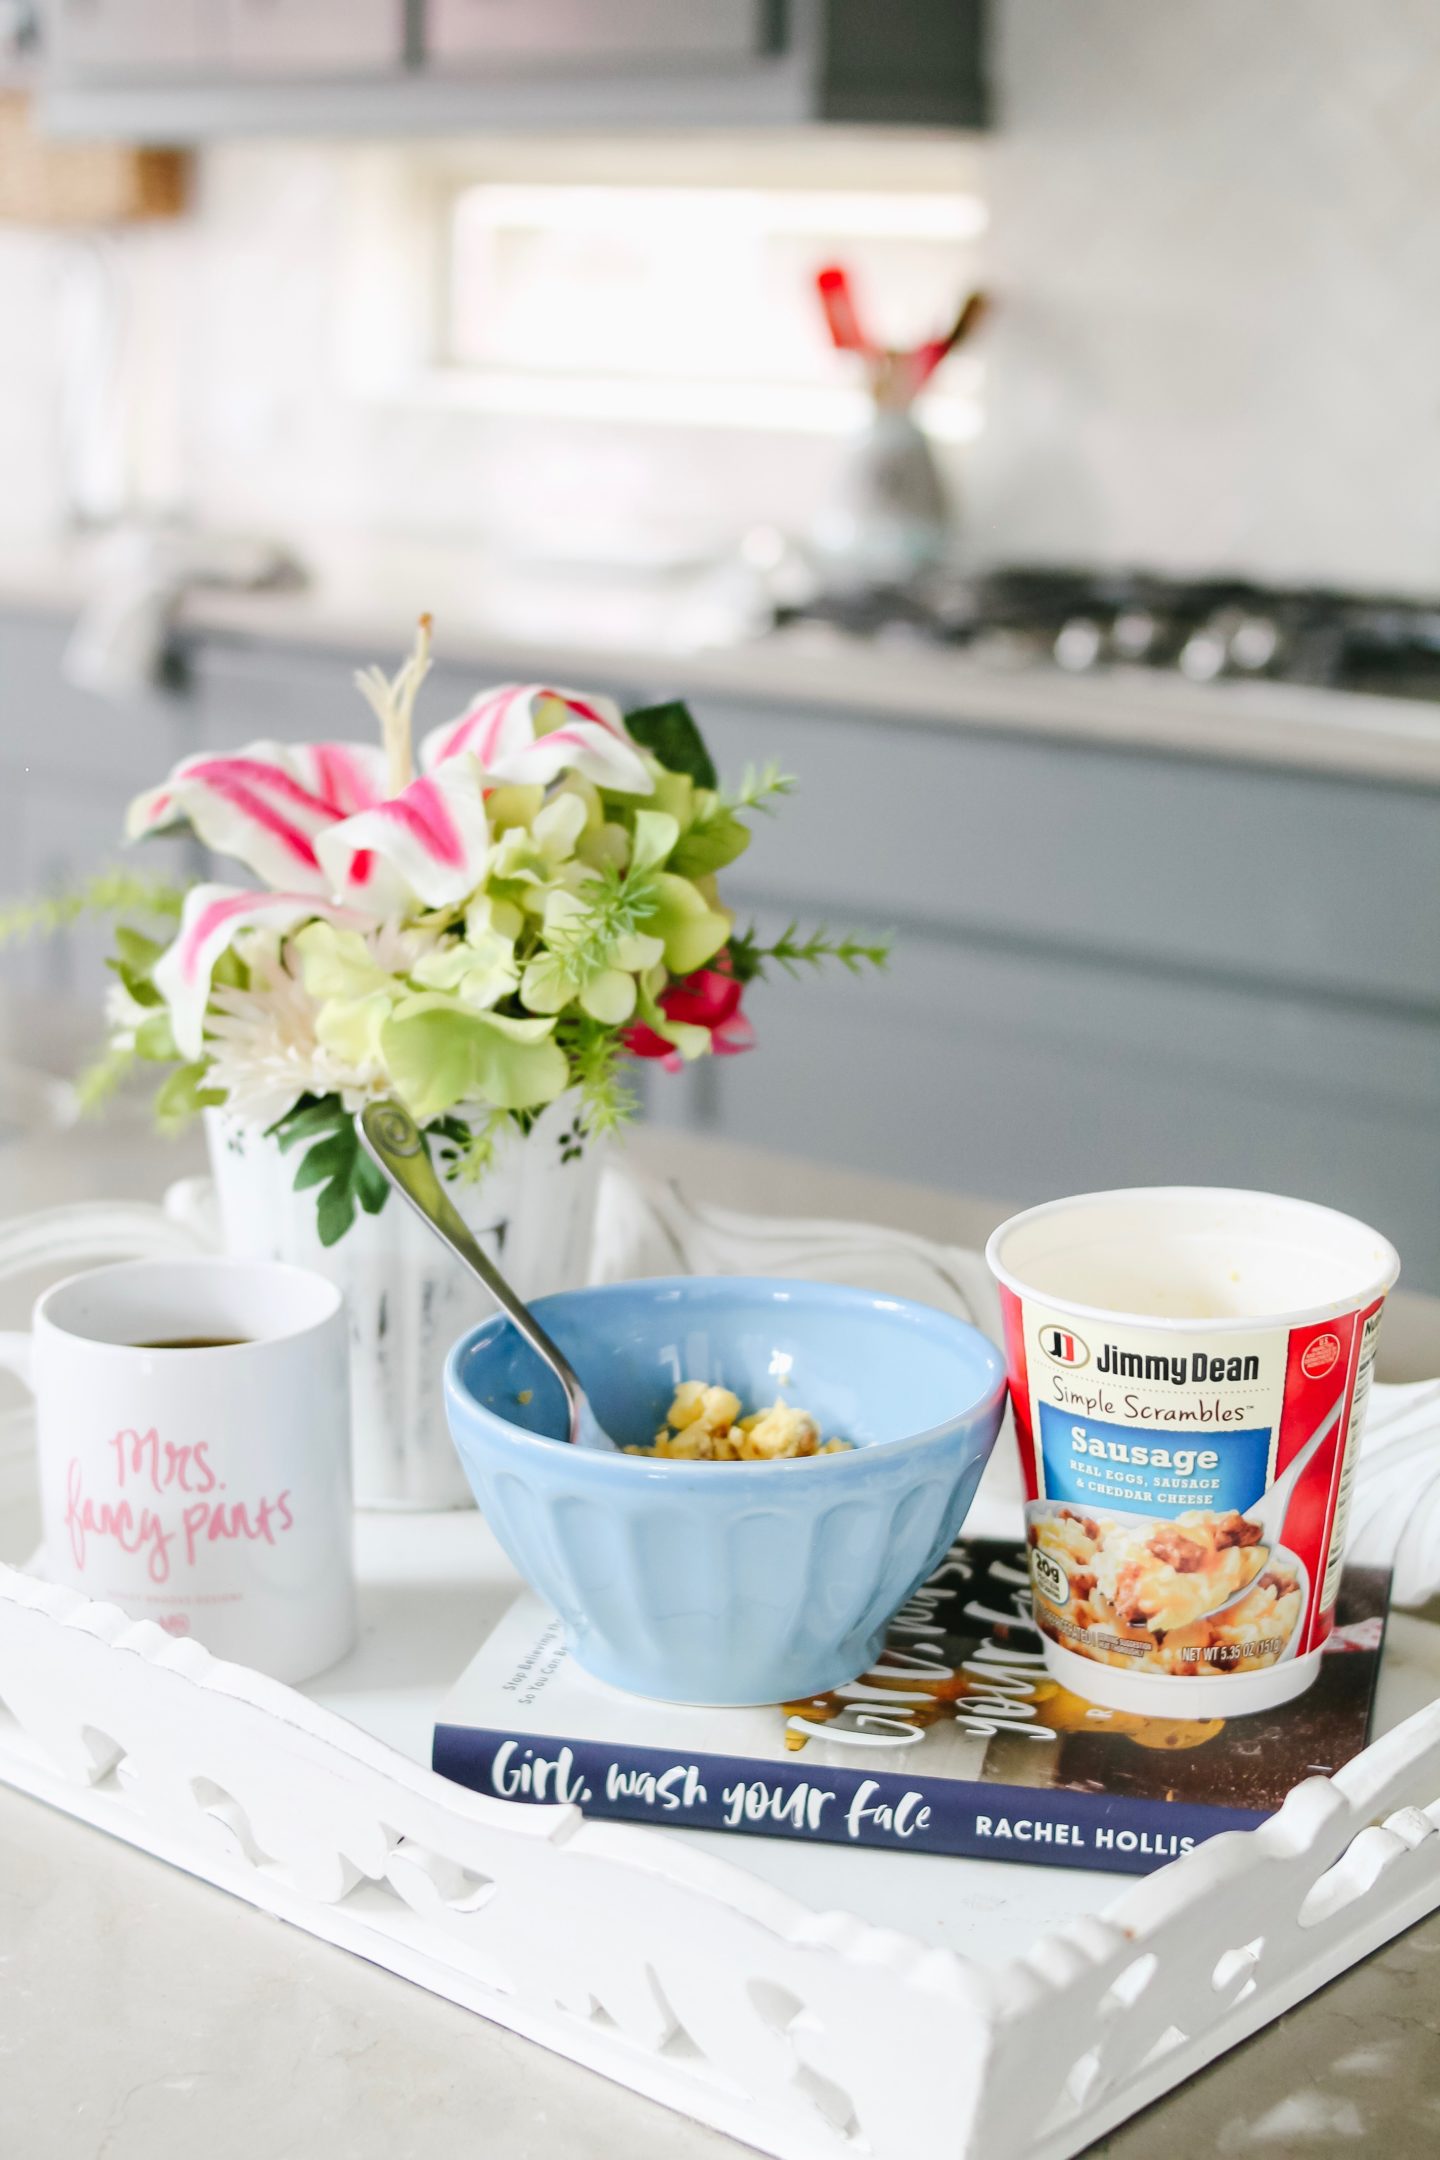 Breakfast hack! 5 Ways to Brighten Up Your Morning Routine. The best morning routine for the most productive day! Especially great for stay-at-home moms & work-from-home moms!